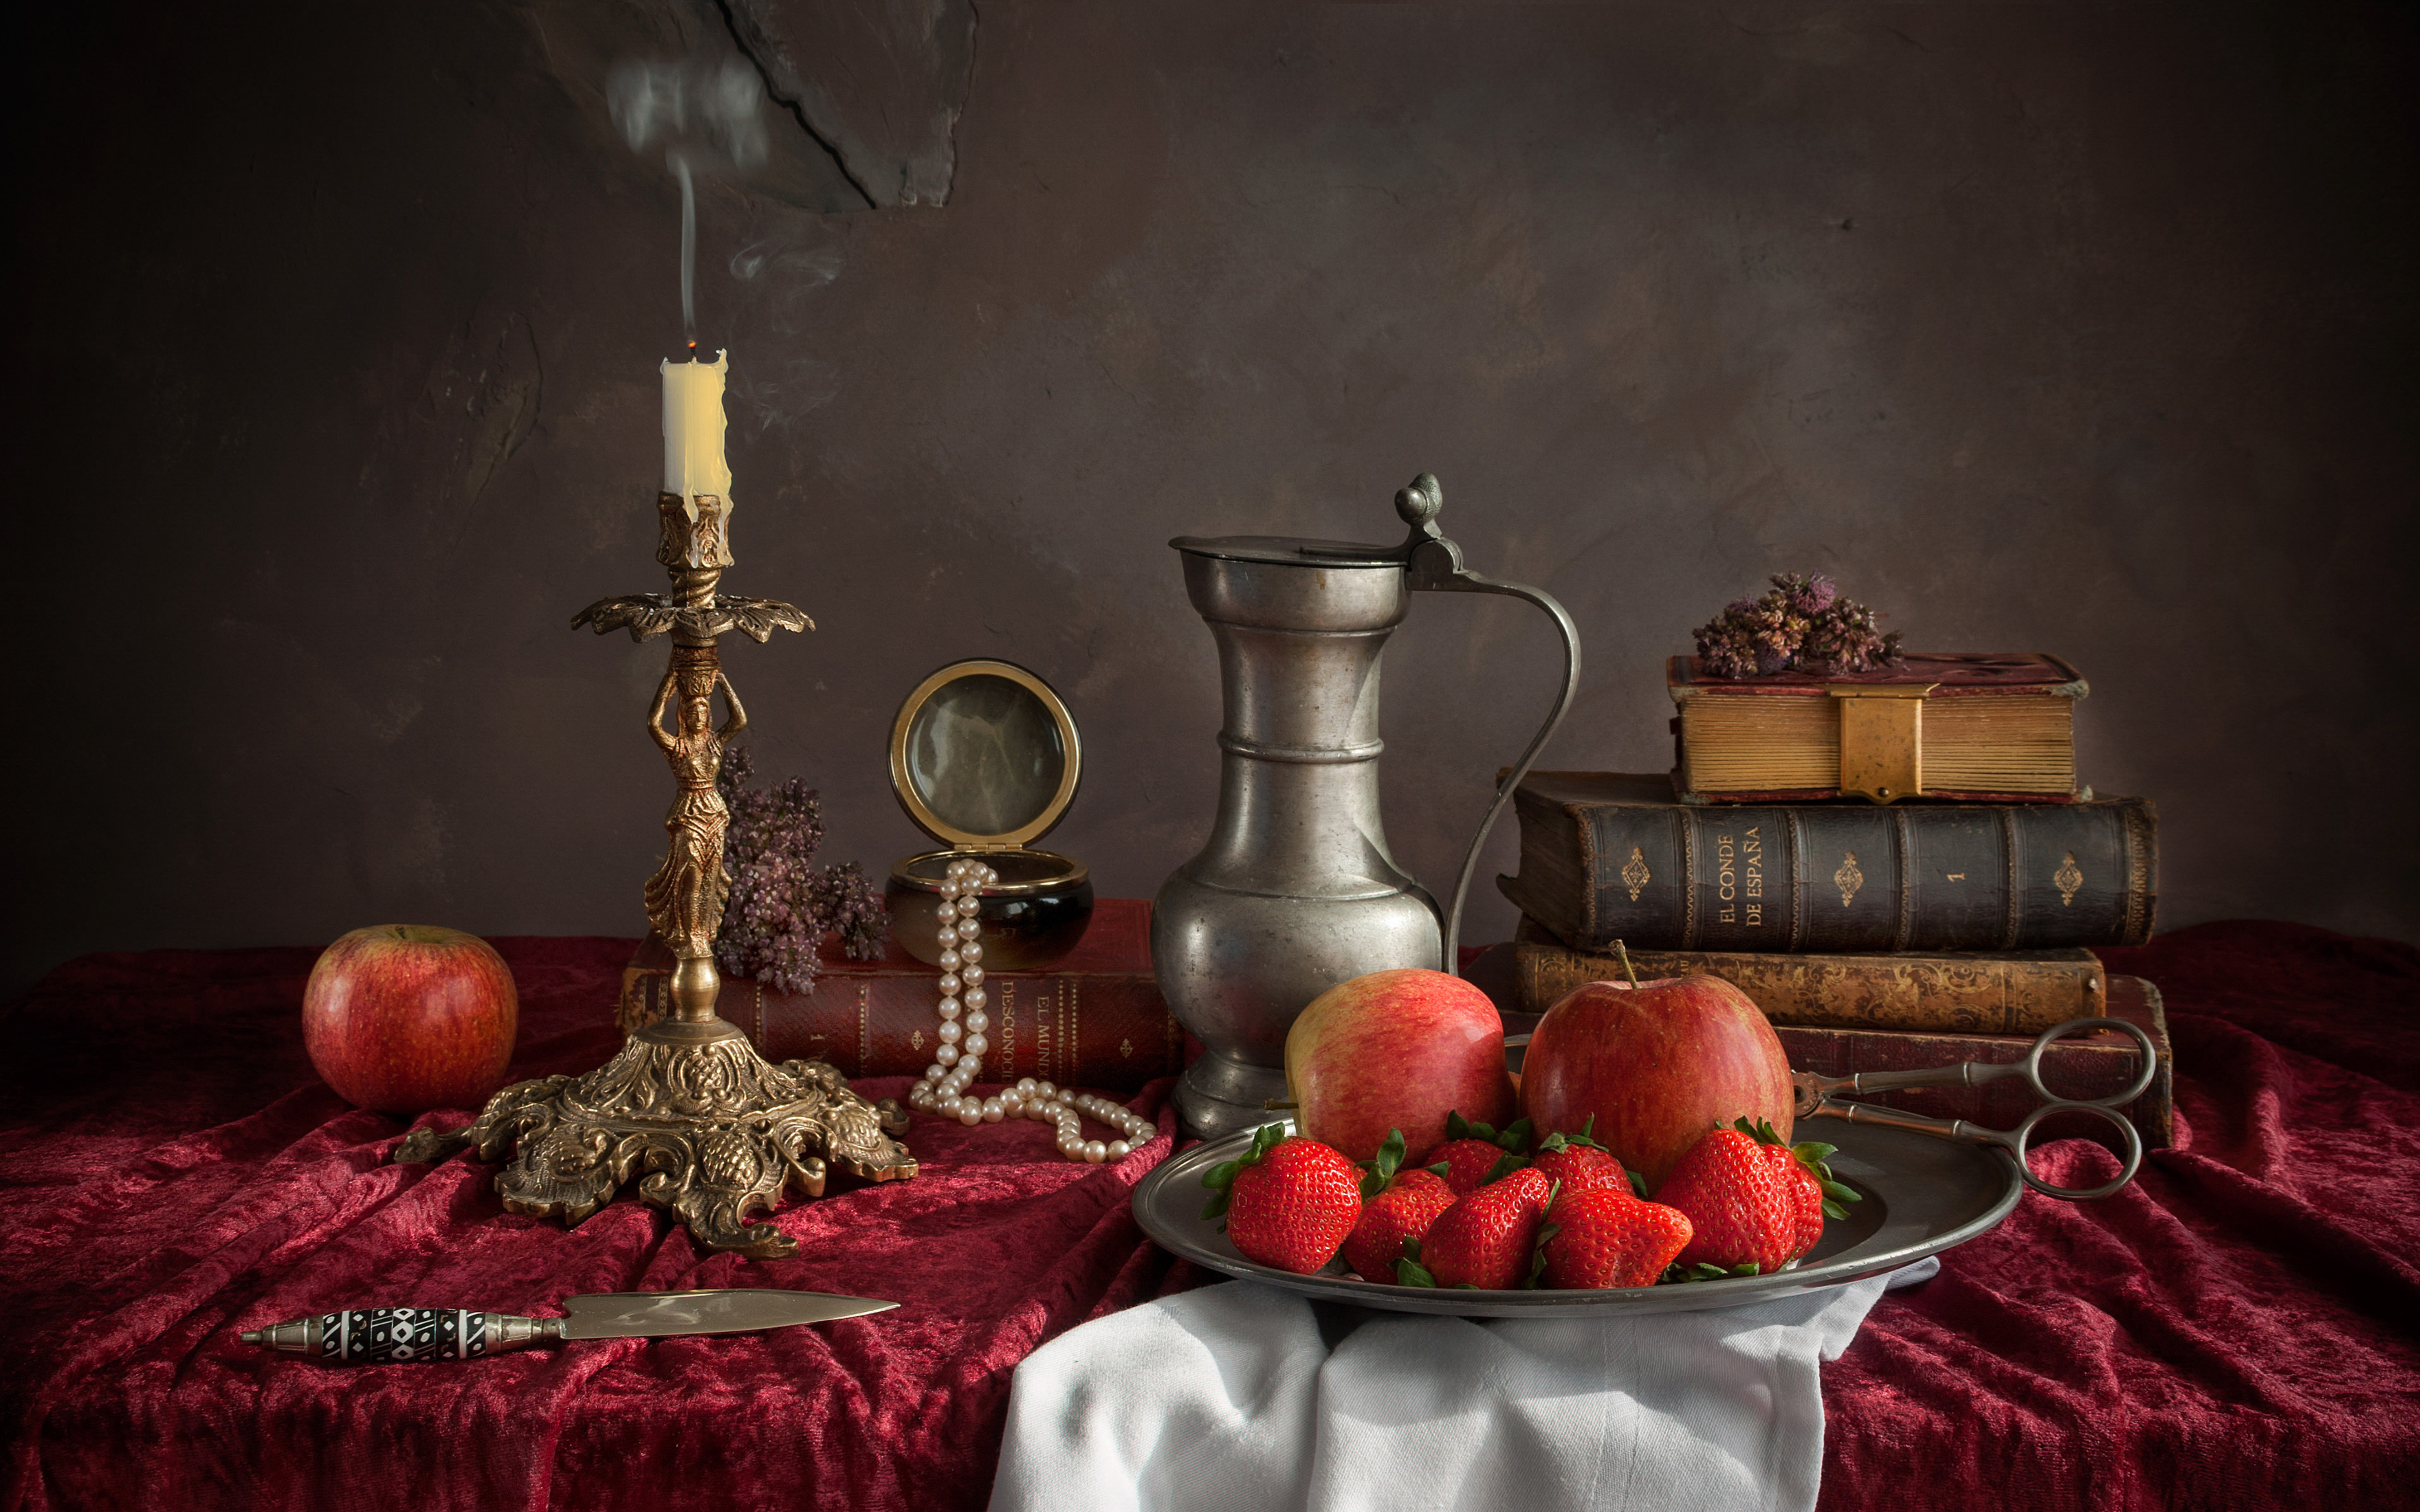 Apple Book Candle Knife Pearl Pitcher Still Life Strawberry 3520x2200